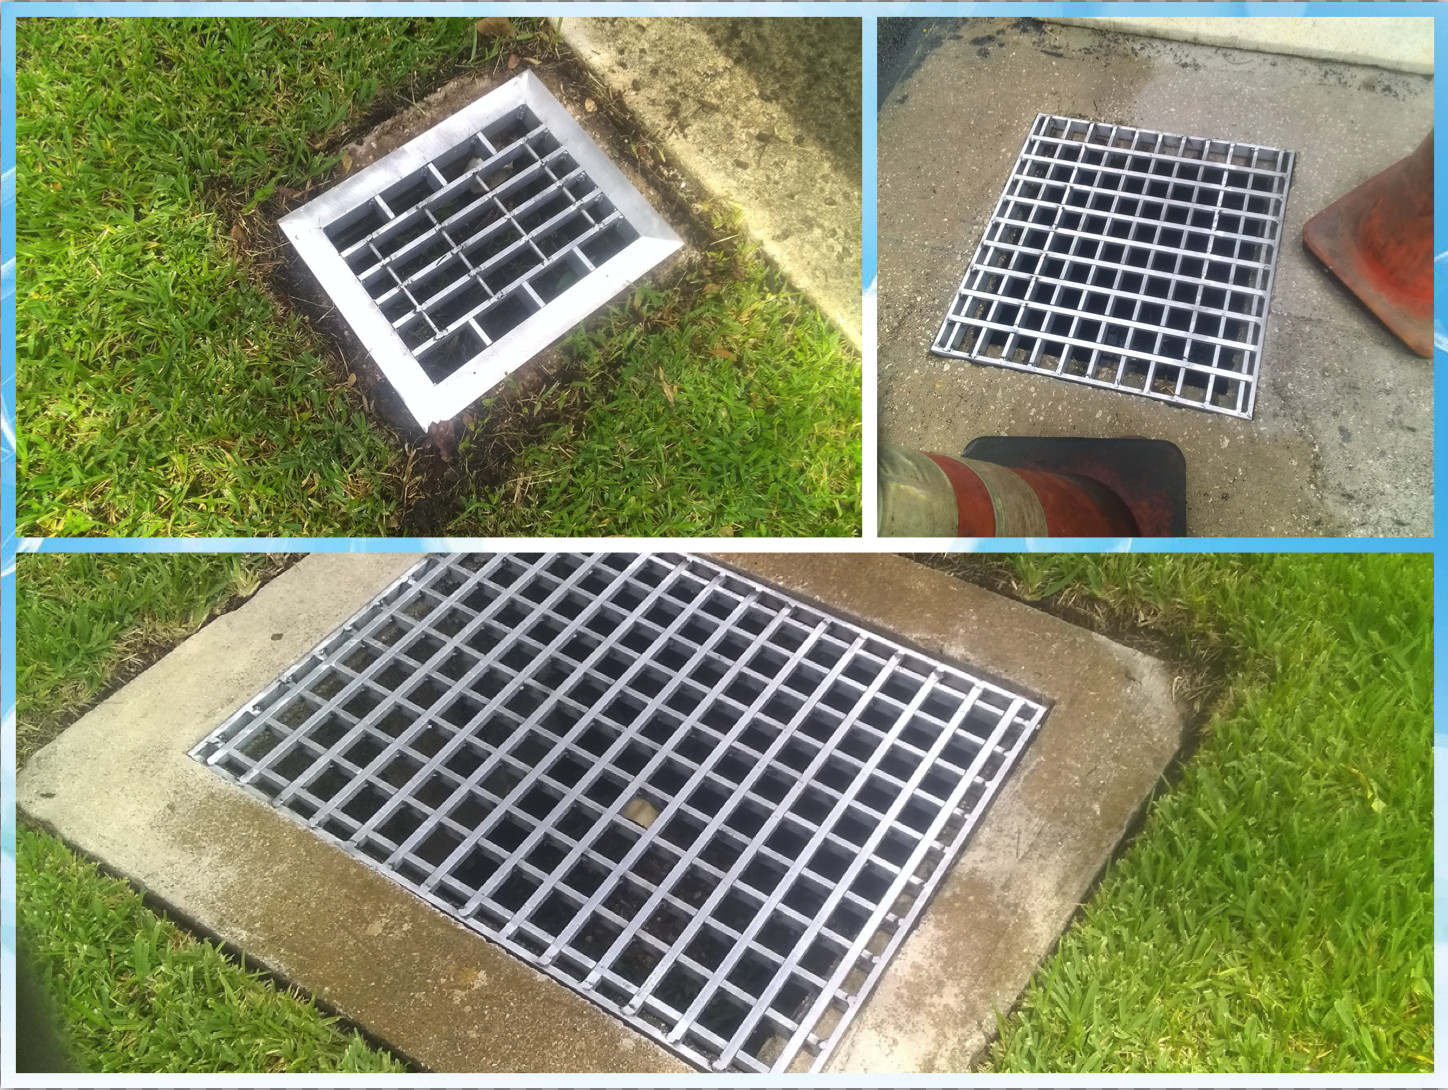 NEW STORM DRAIN COVERS